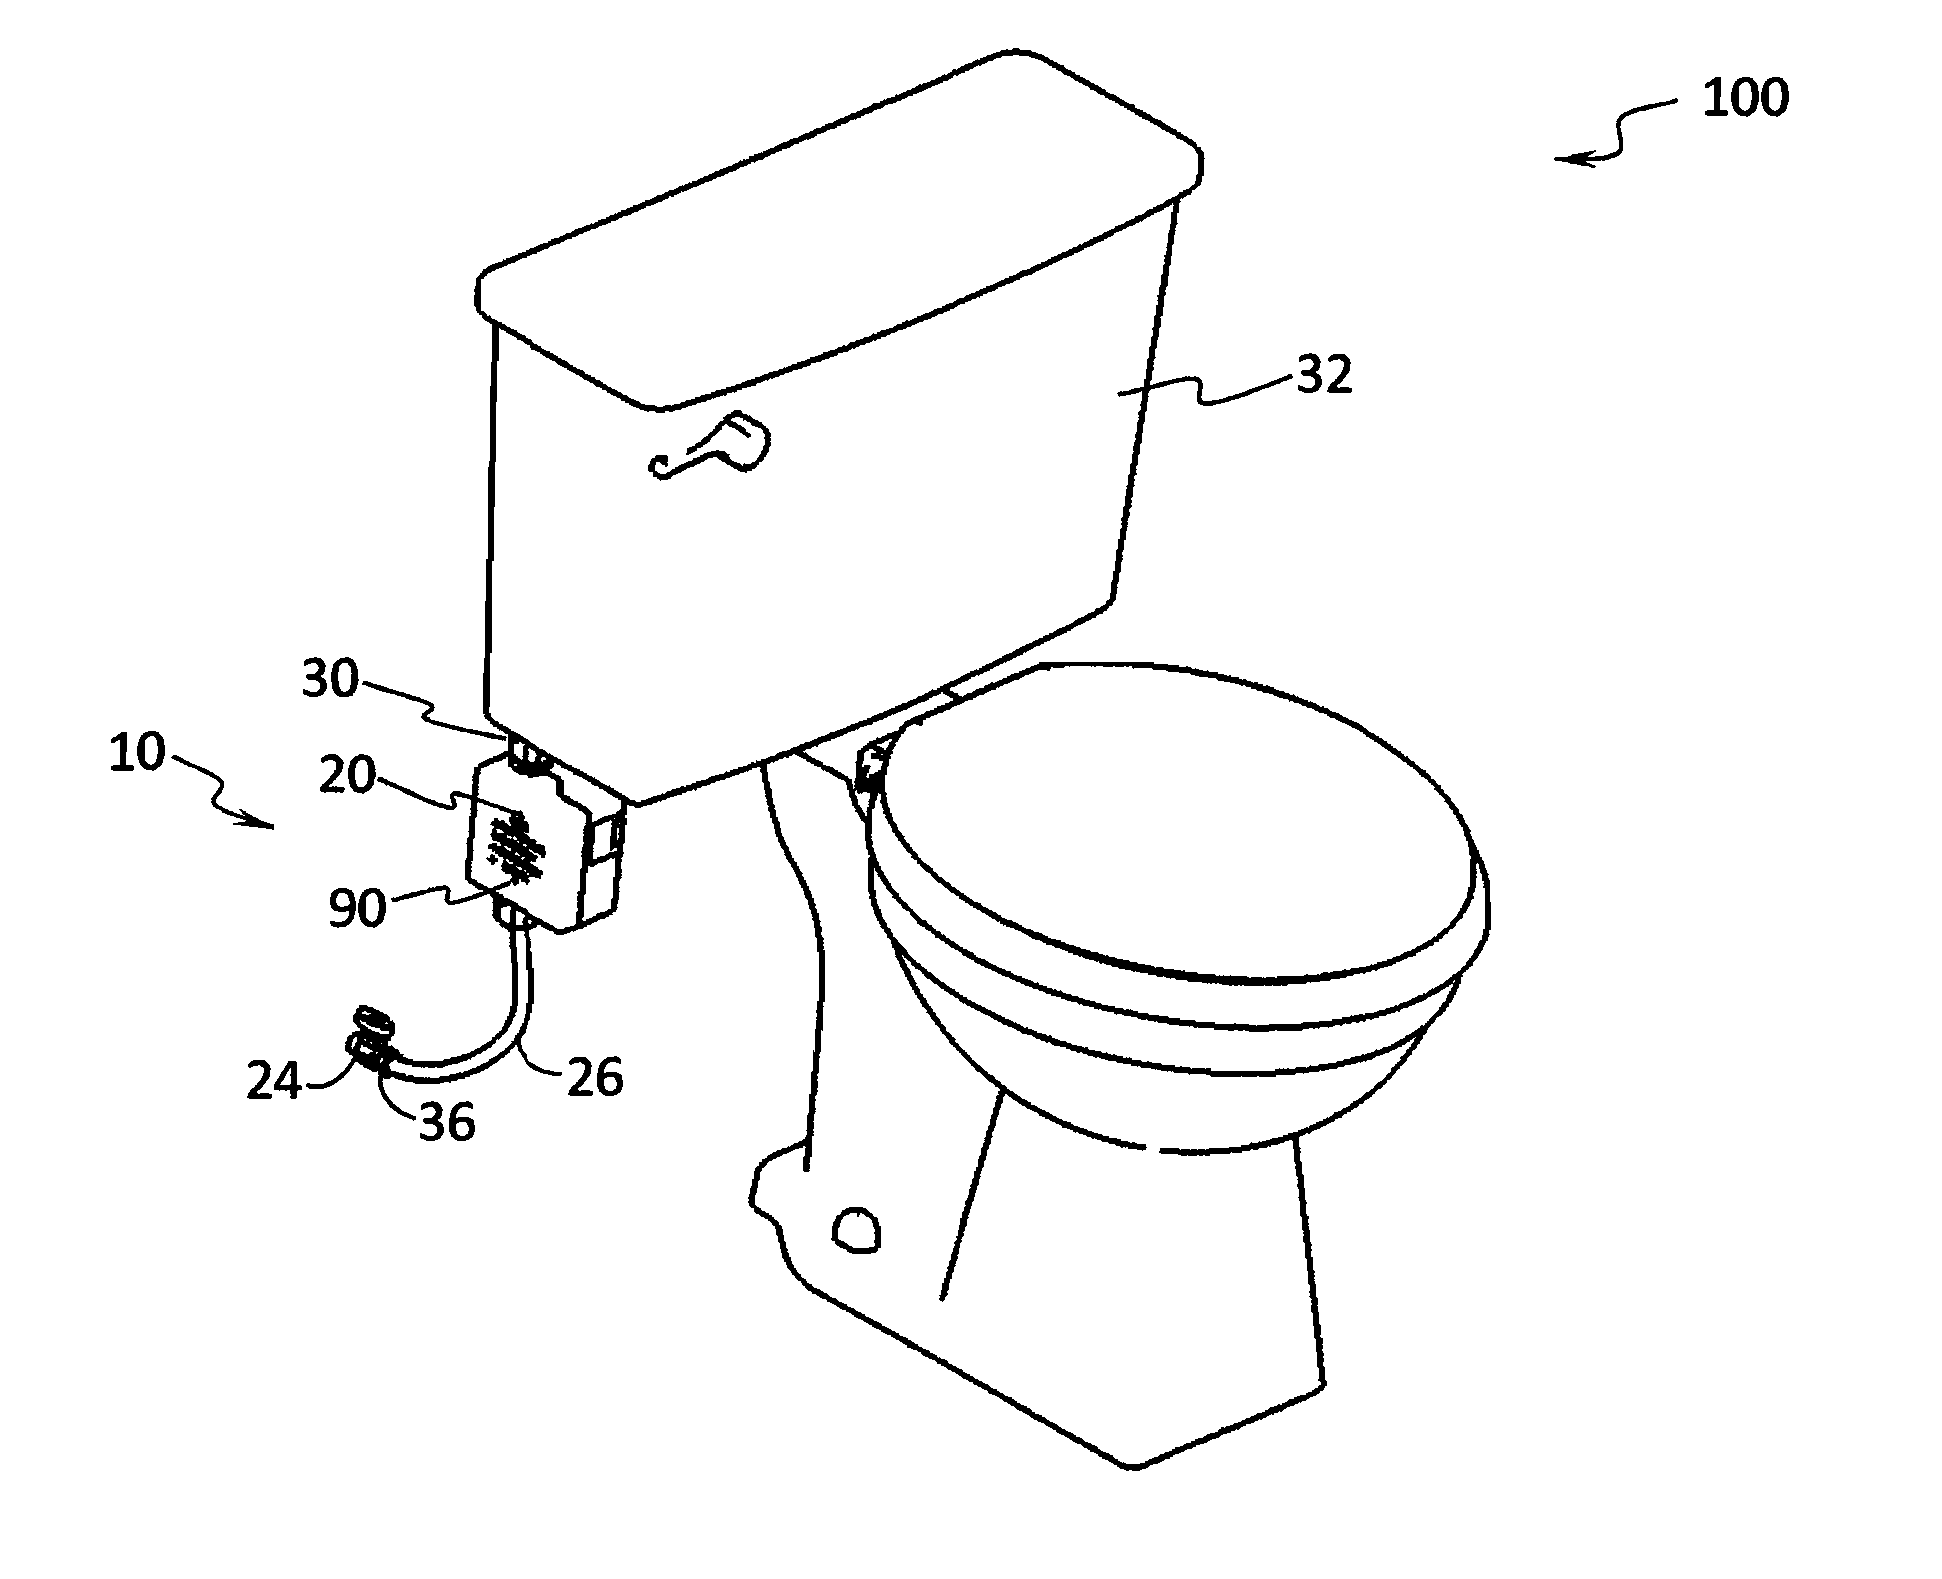 Toilet water damage protection kit and method